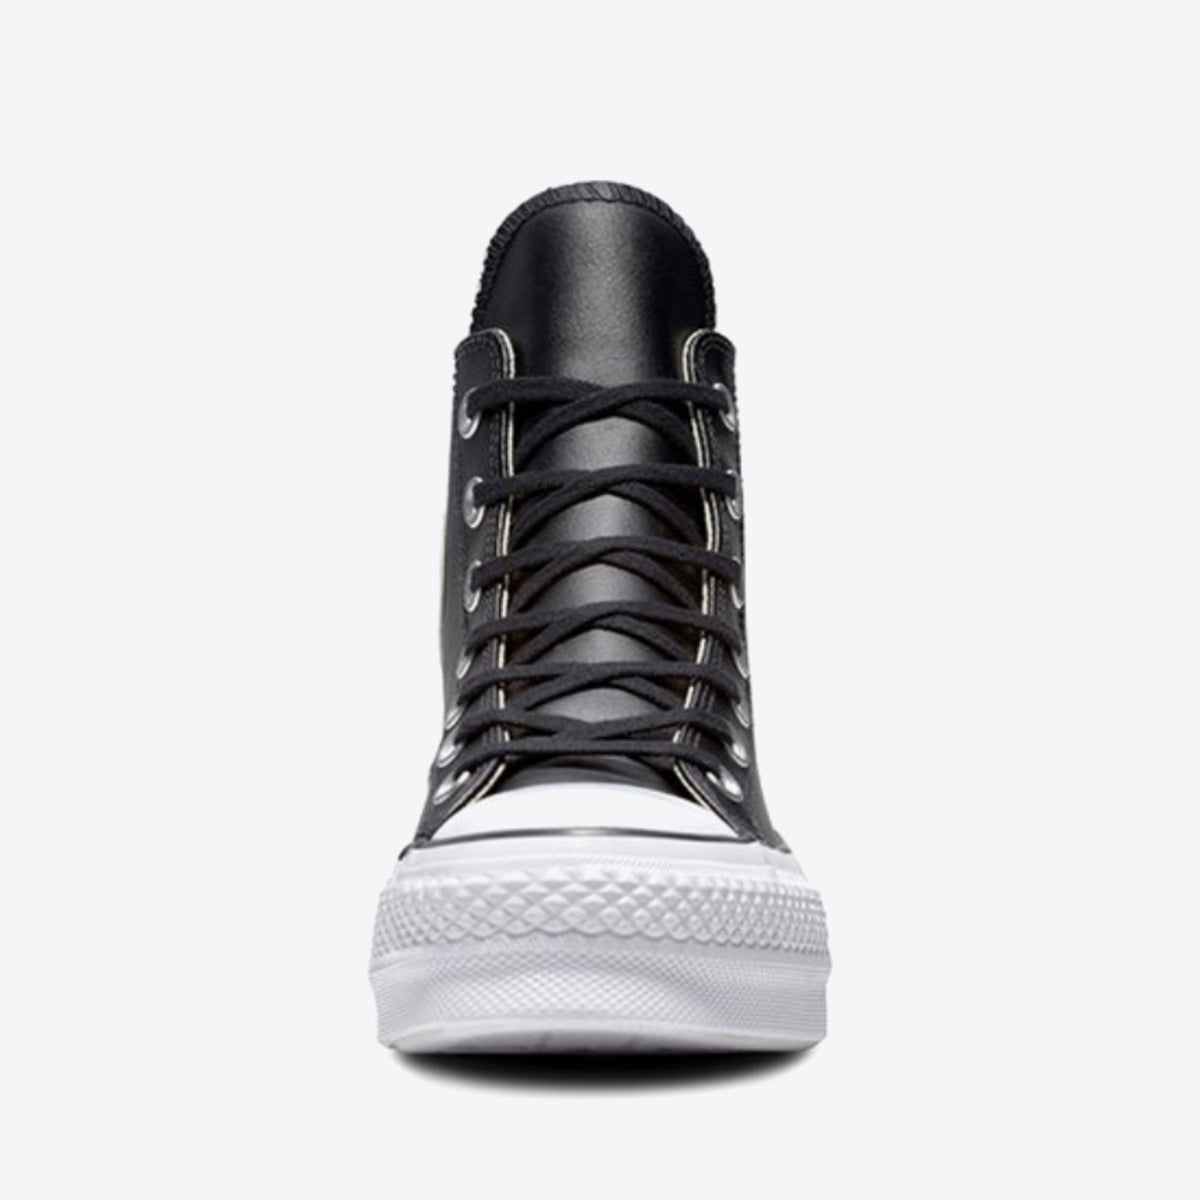 CONVERSE Chuck Taylor All Star Lift Leather High Black - Image 4